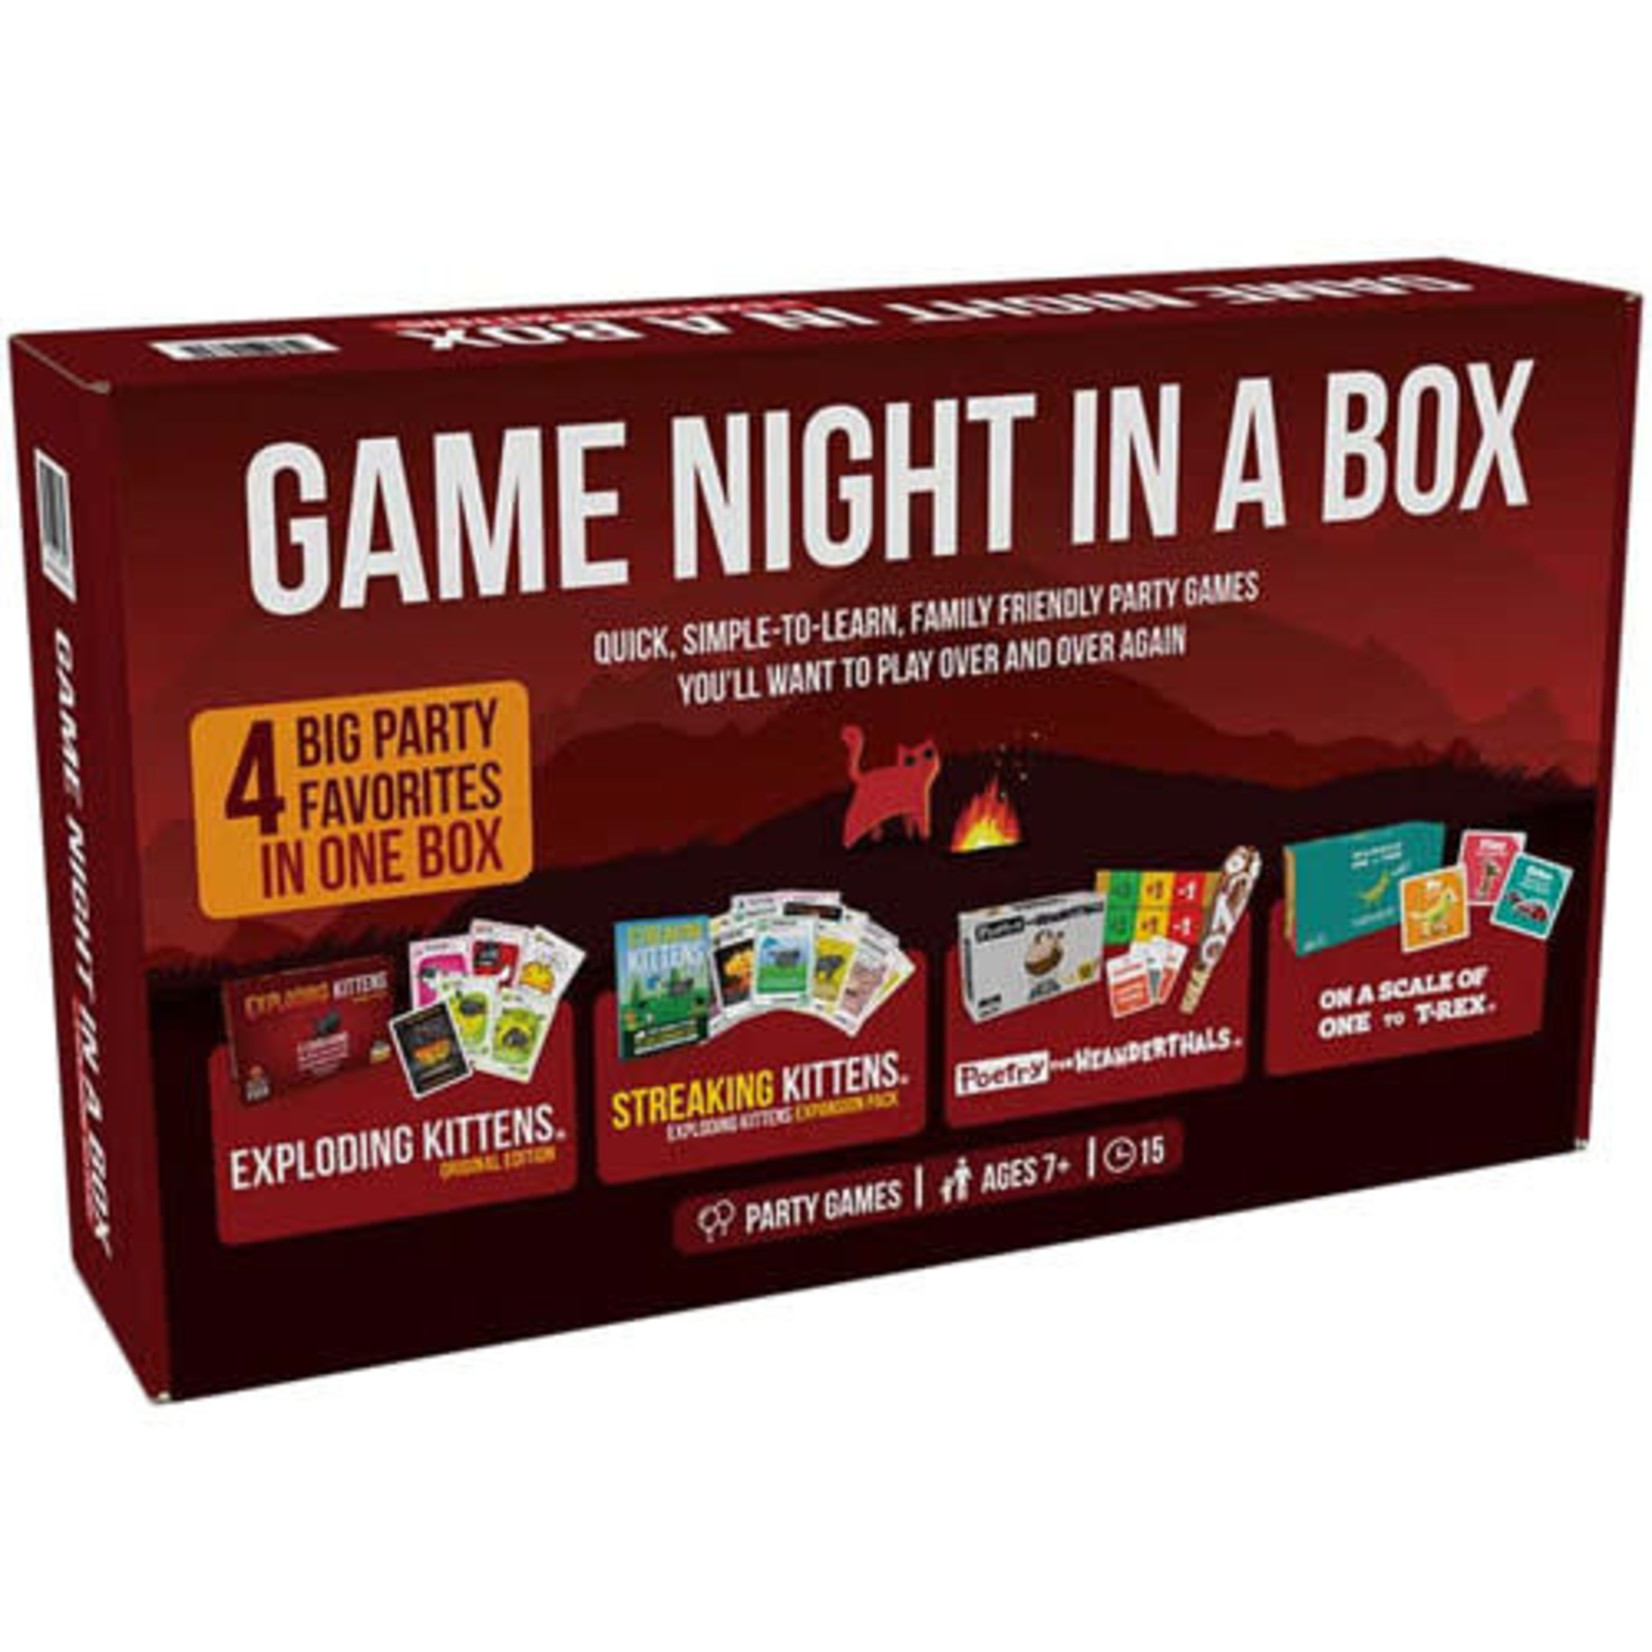 Exploding Kittens Game Night in a Box by Exploding Kittens